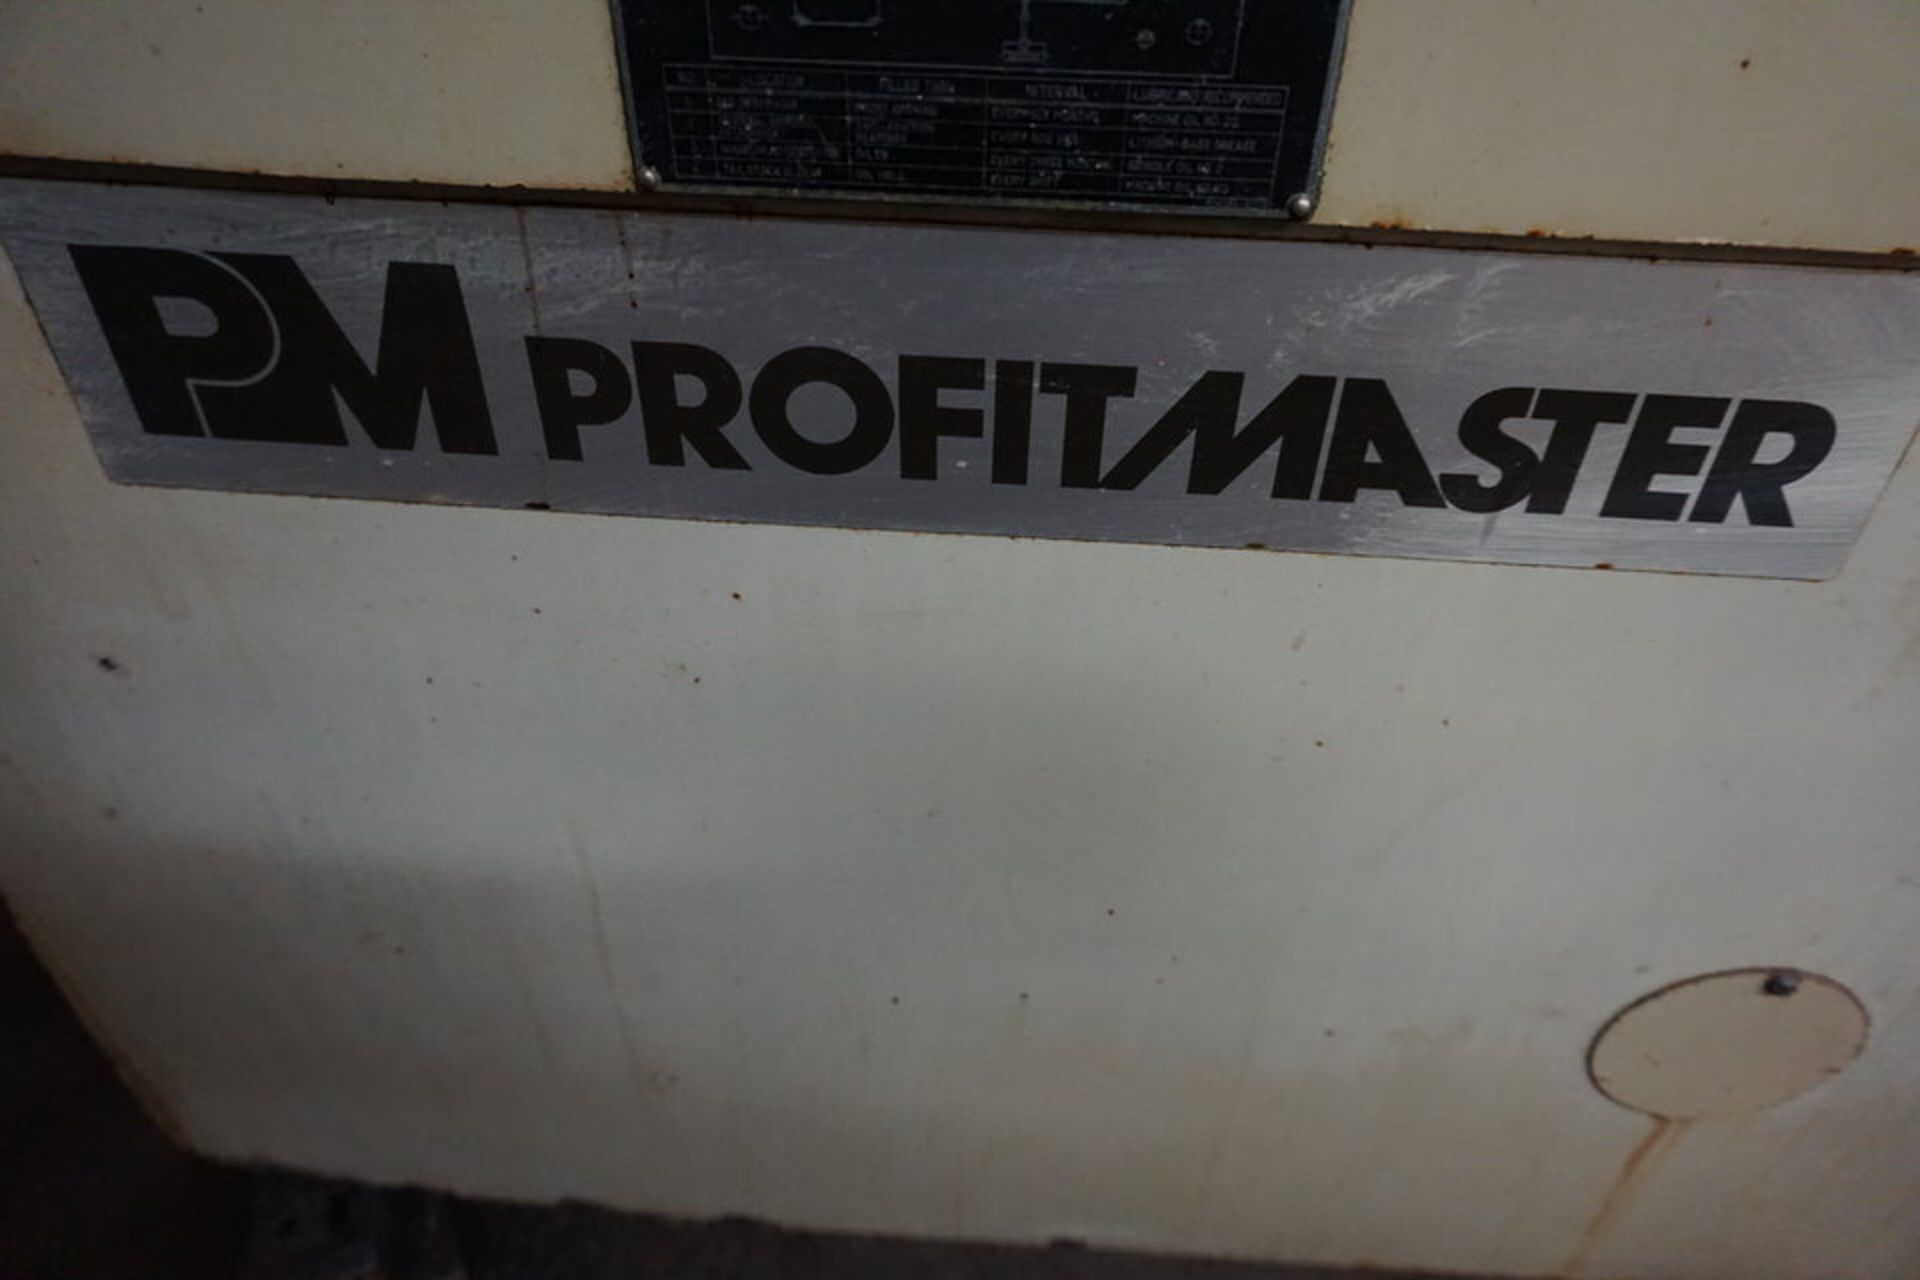 PM PRO FIT OD GRINDER, TYPE: 12 X 60 W/ ASSORT TOOLING AS SHOWN - Image 2 of 9